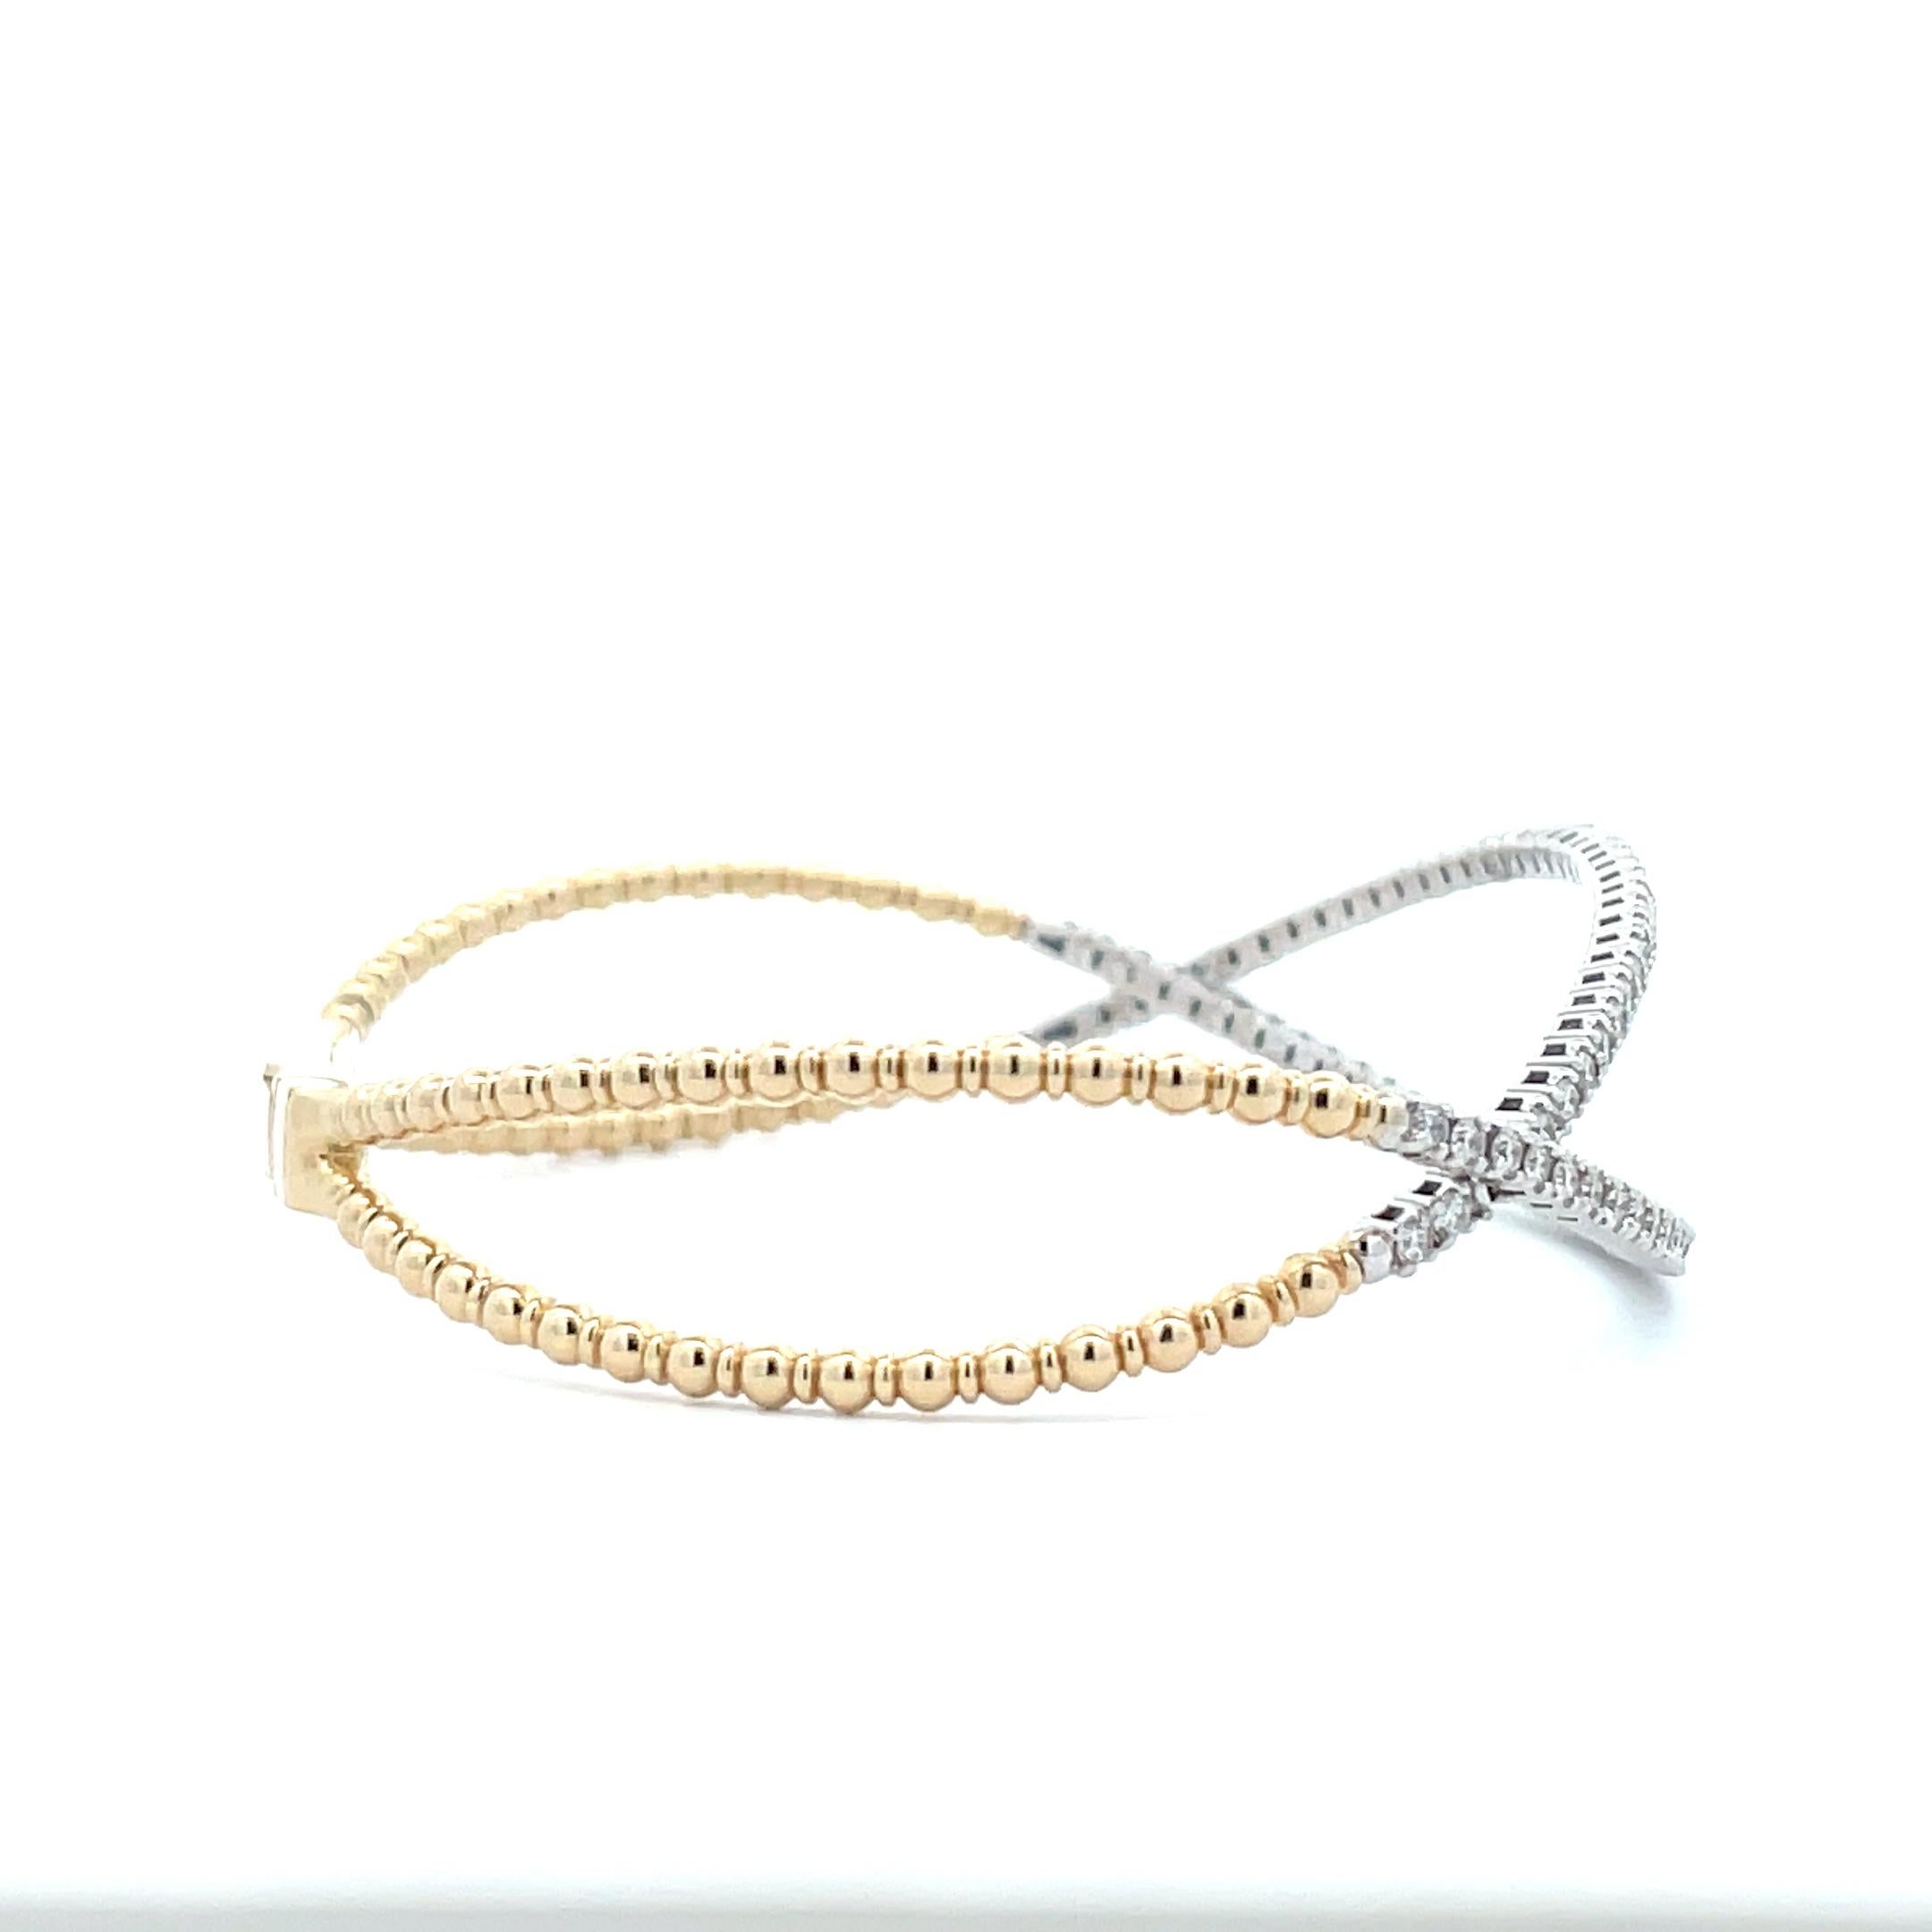 Add an extra touch of elegance to your wardrobe with this gorgeous Diamond infinity criss cross bangle. Crafted in 14K solid gold, this piece features flexible gold beads and pave set diamonds. This versatile accessory can be worn alone or stacked